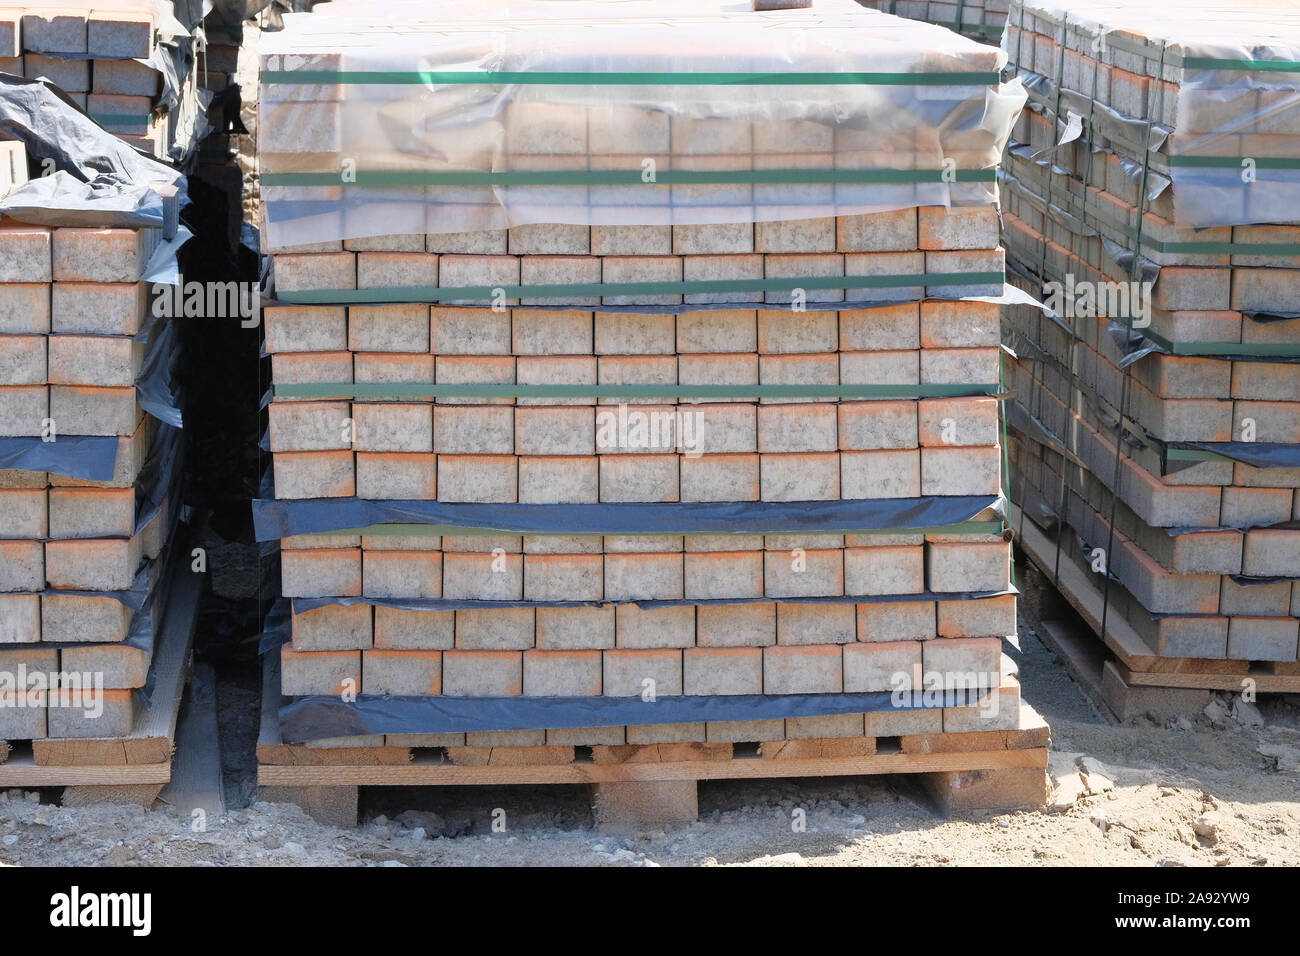 Construction Materials. Pile of gray bricks at construction site. Building materials for construction of buildings and structures. Stock Photo